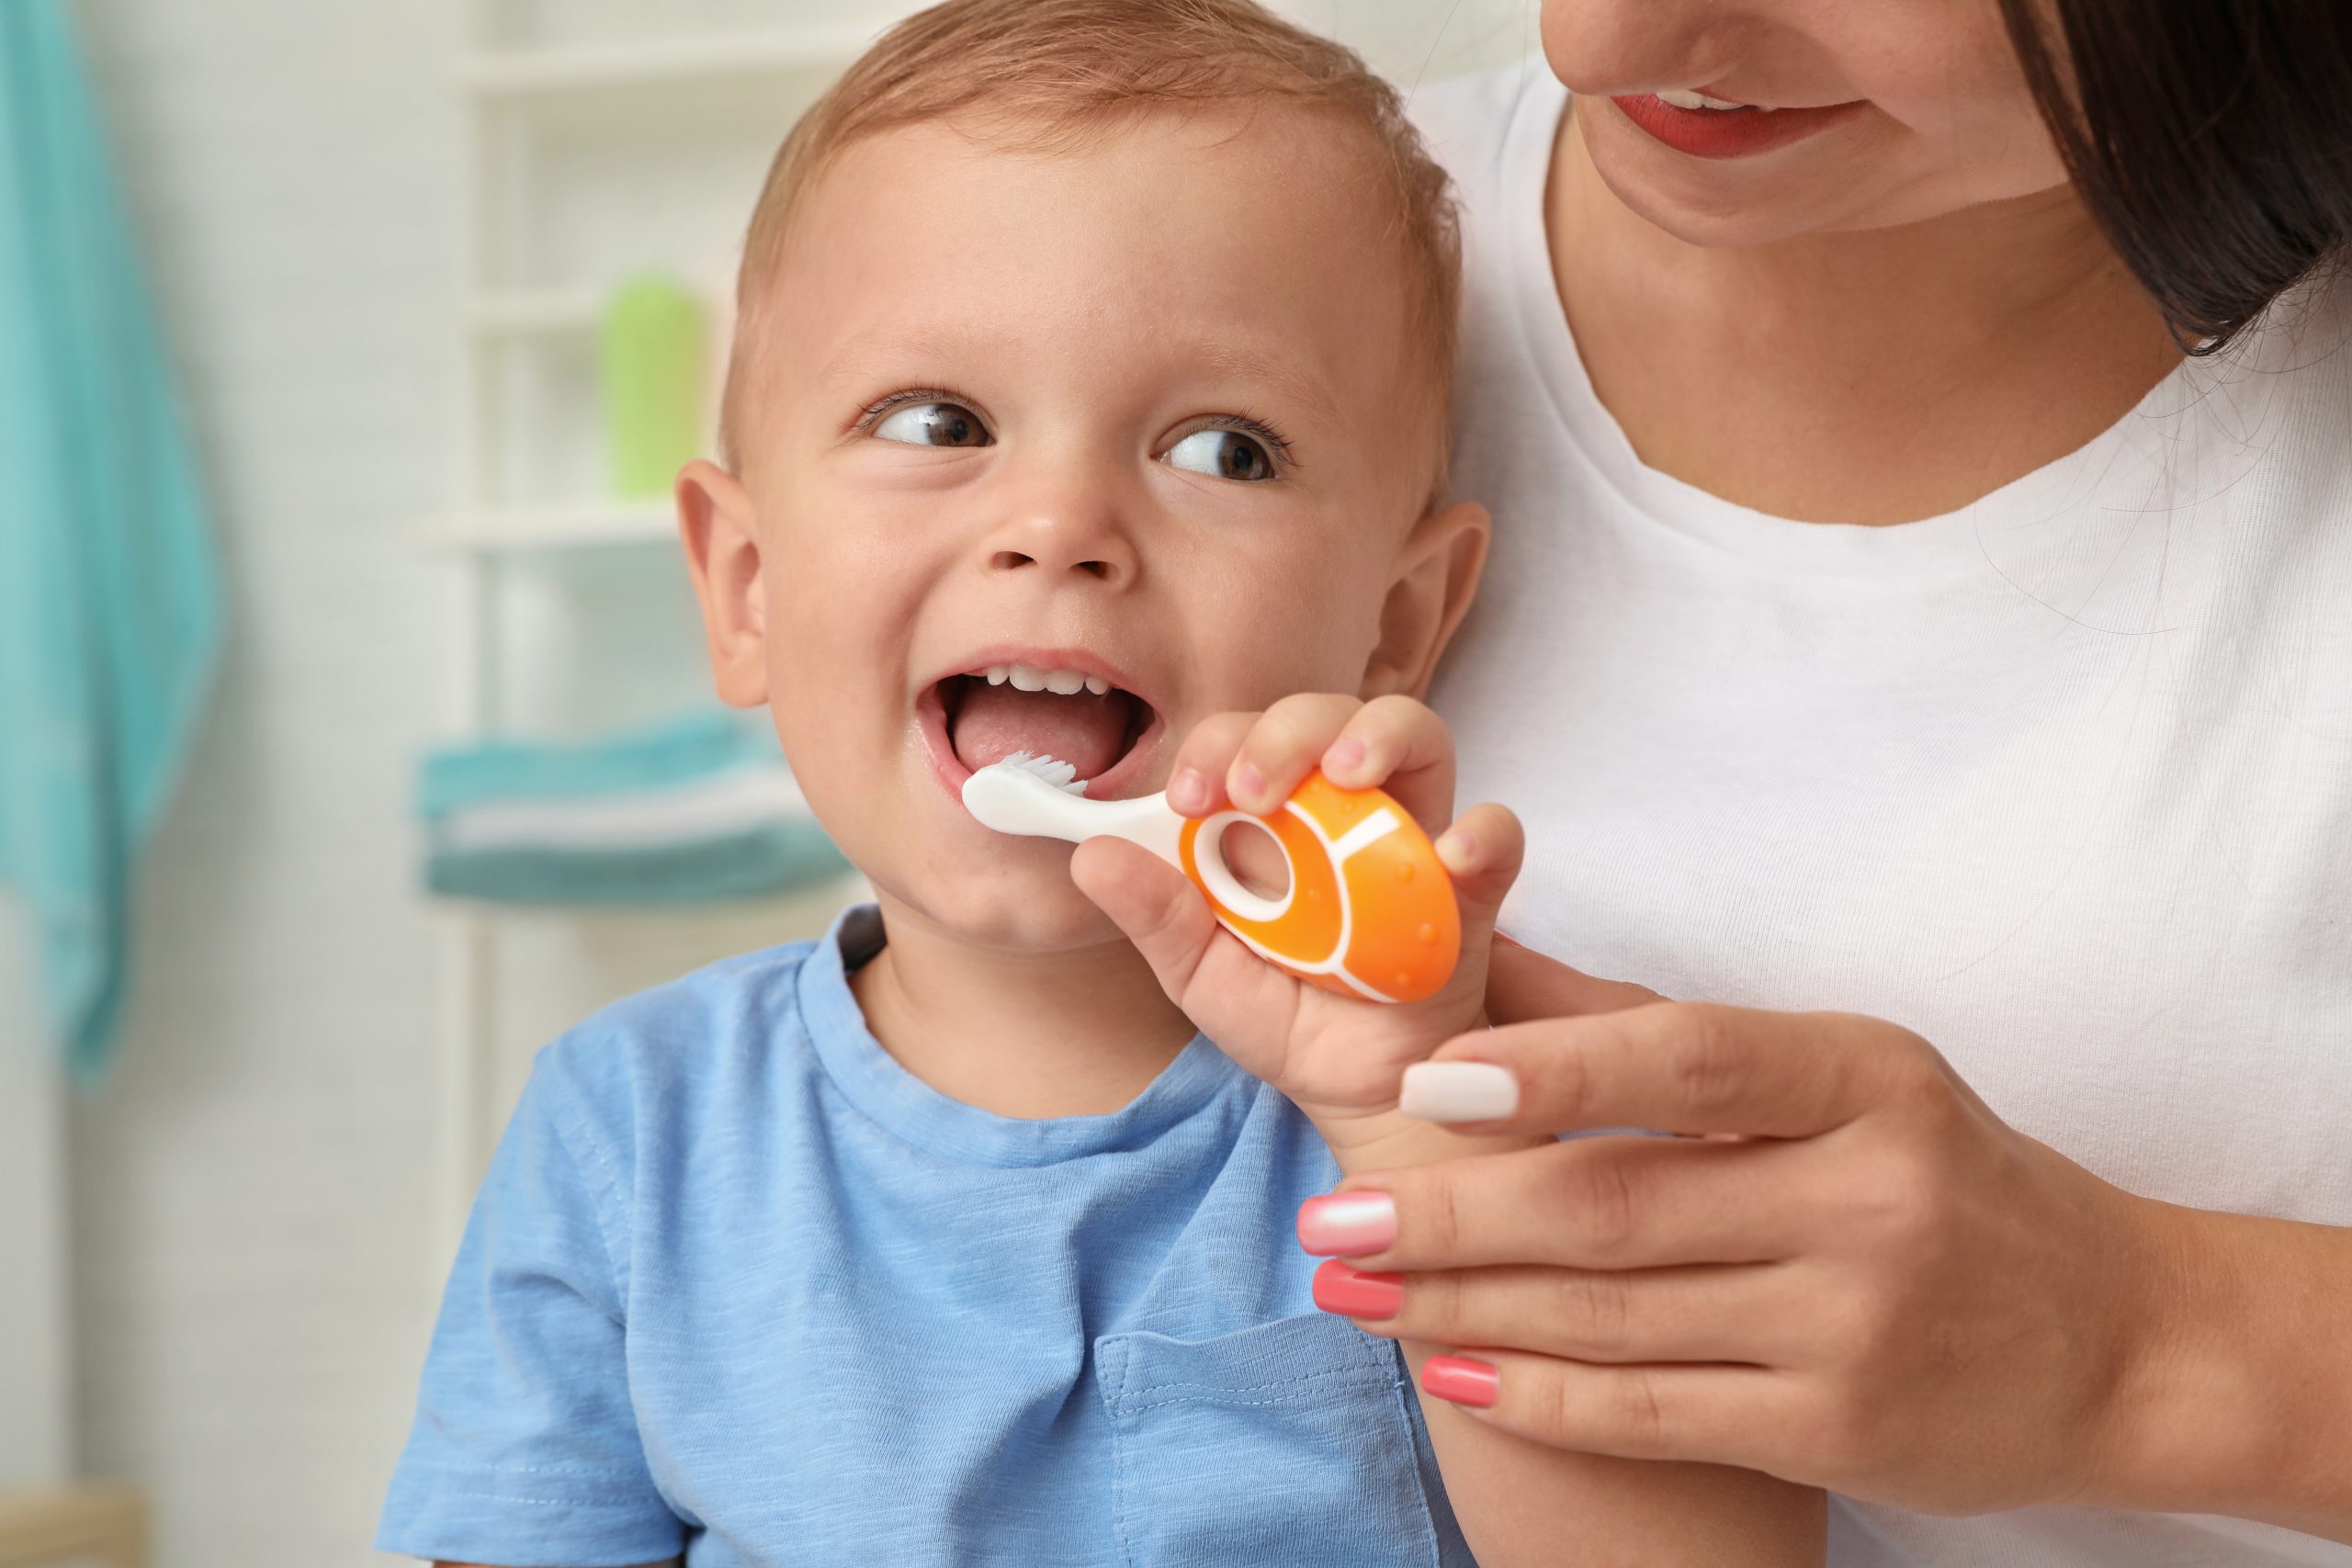 When Should My Child First Visit the Dentist?